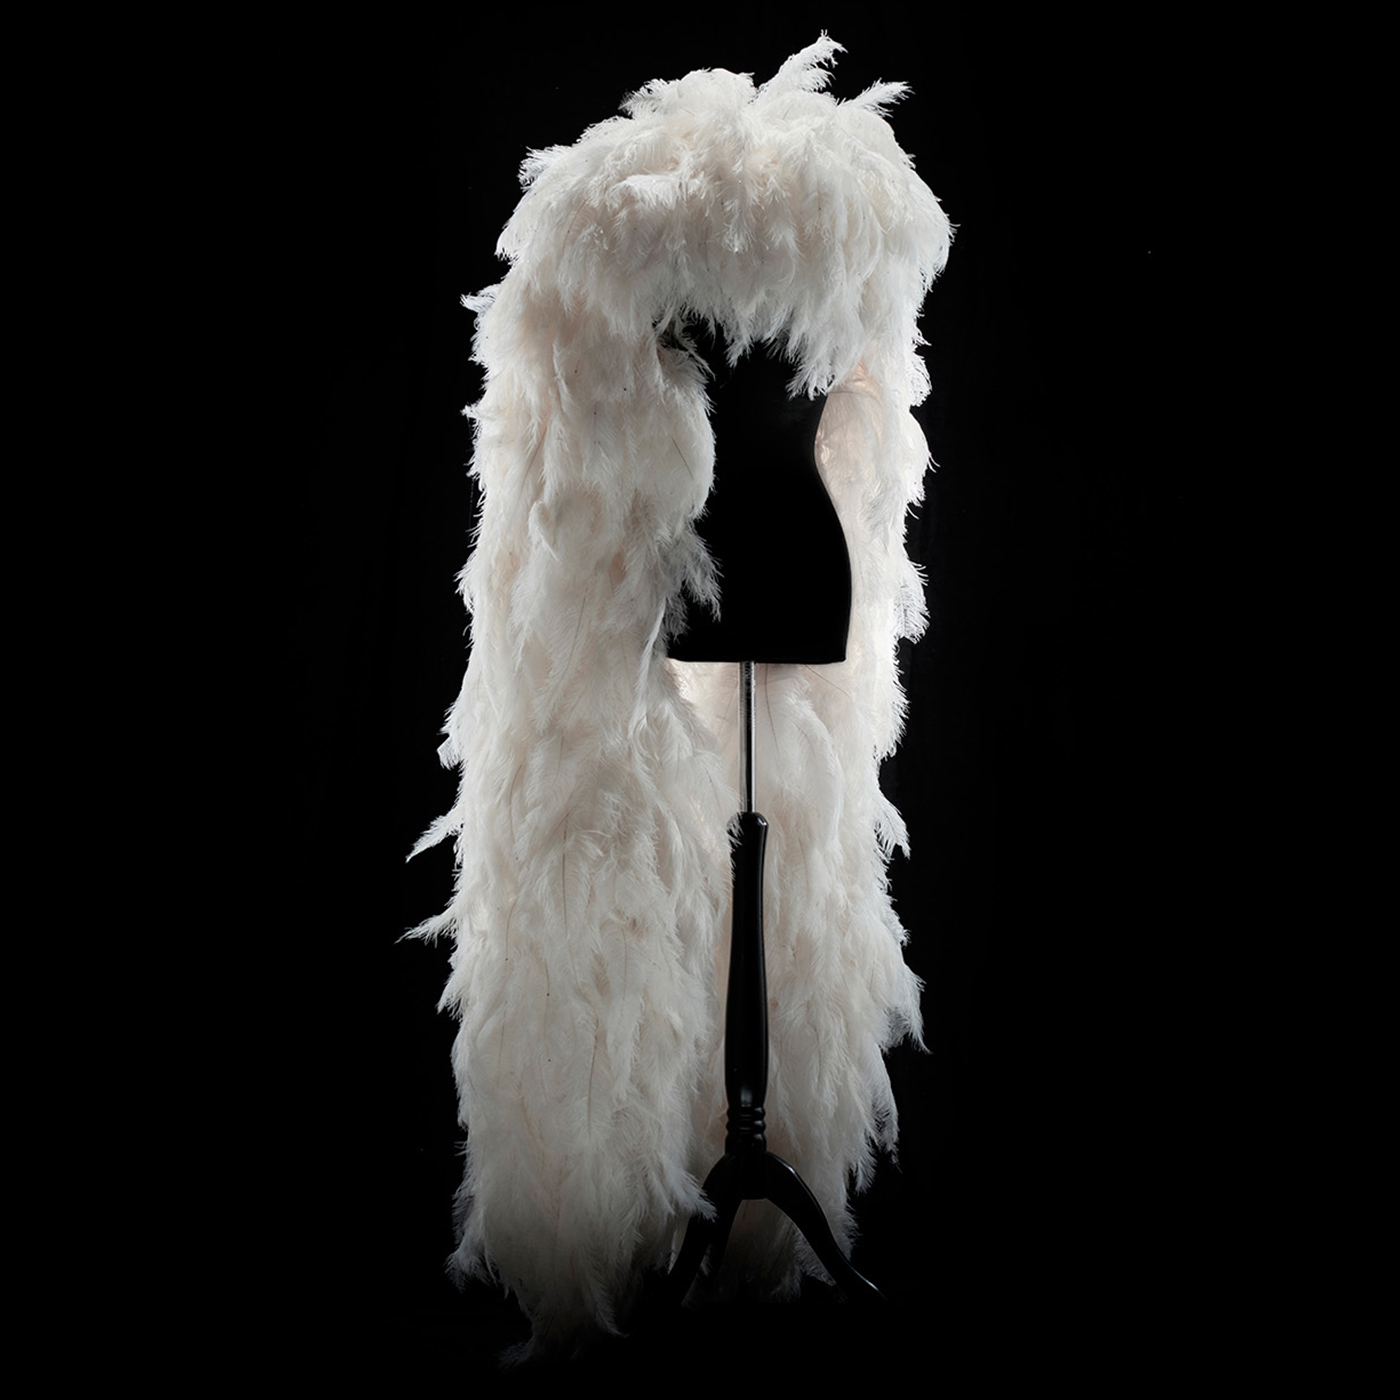 hotfans 25 Ply White Luxury Ostrich Feather Boa 71long (180 cm)